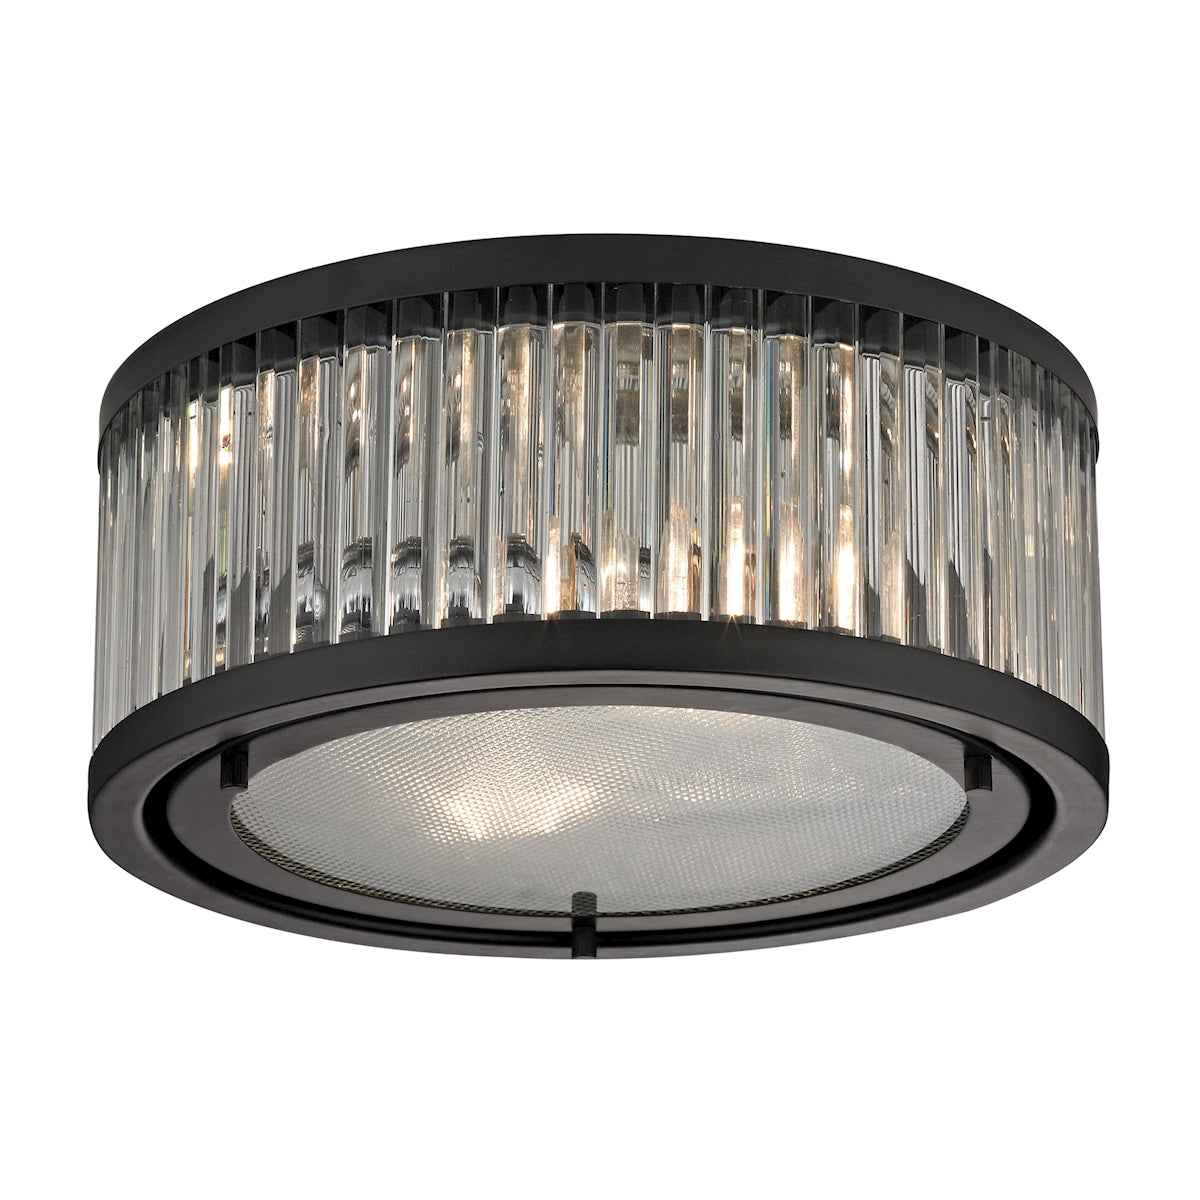 Linden Manor 2-Light Flush Mount in Oil Rubbed Bronze with Diffuser